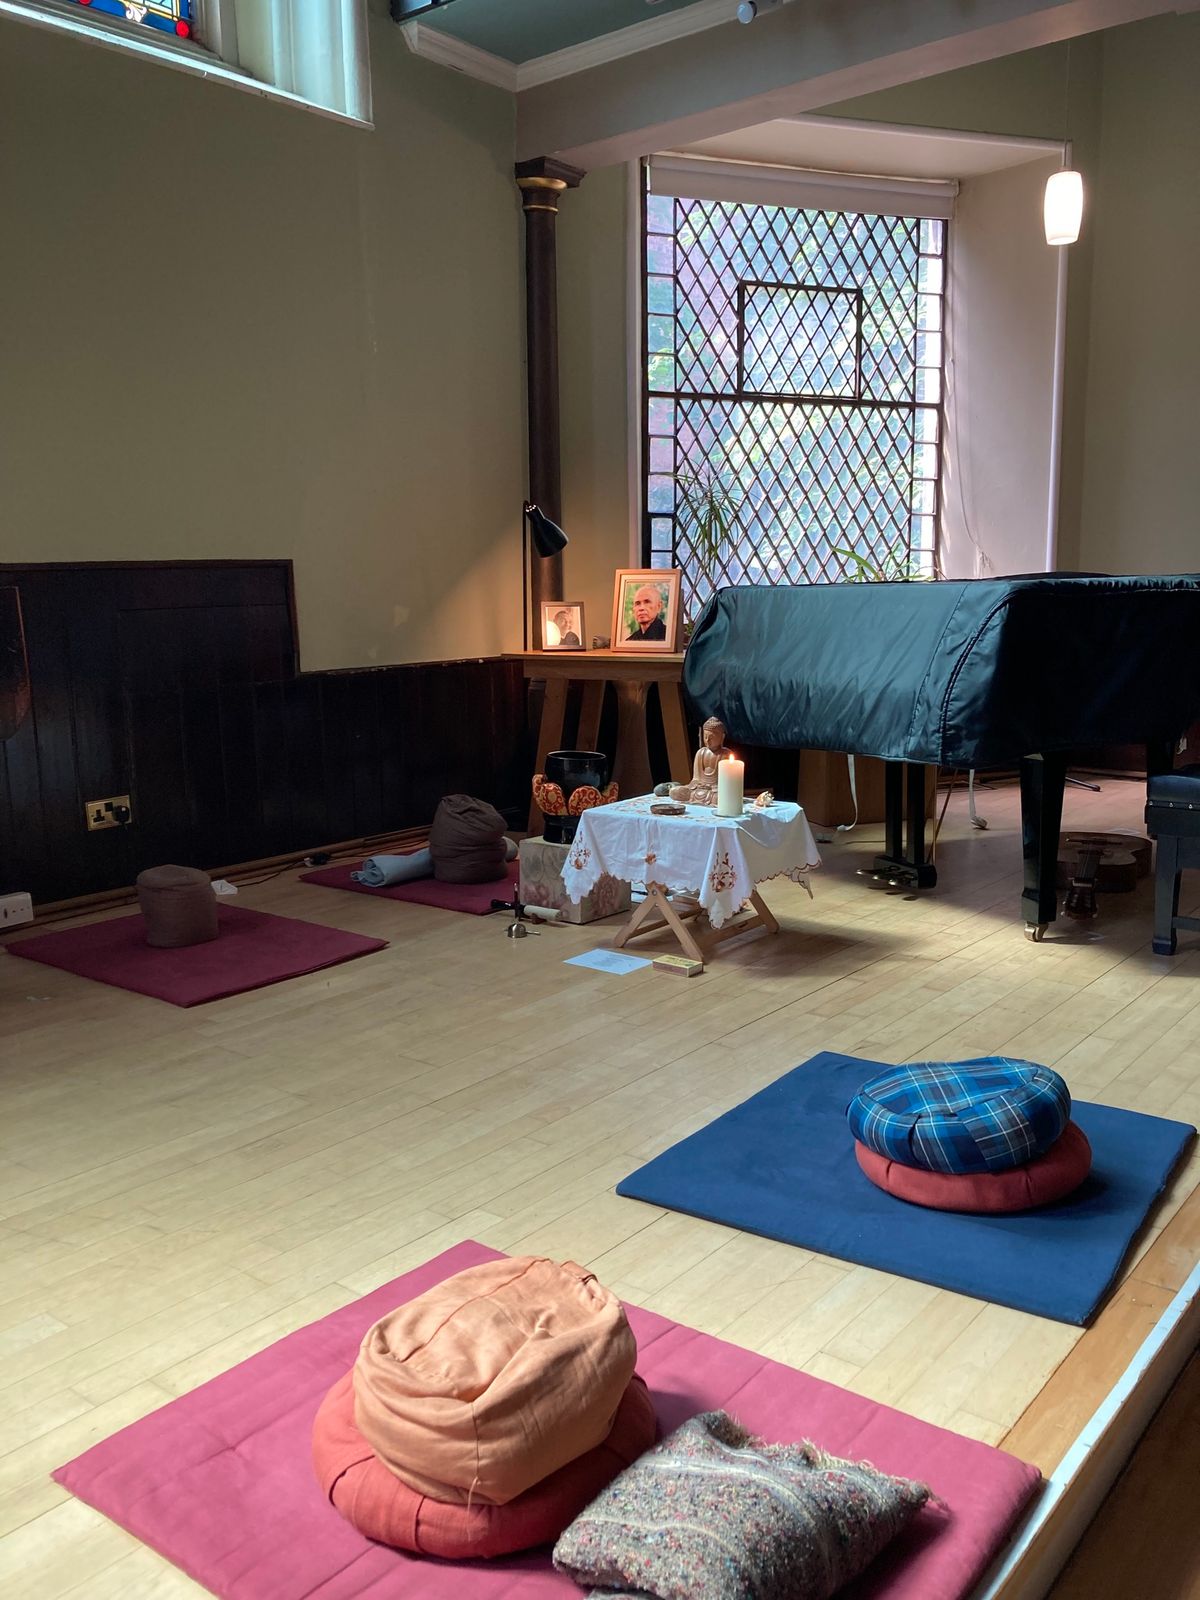 Touching the Ultimate: A Day of Mindfulness in the Plum Village Tradition